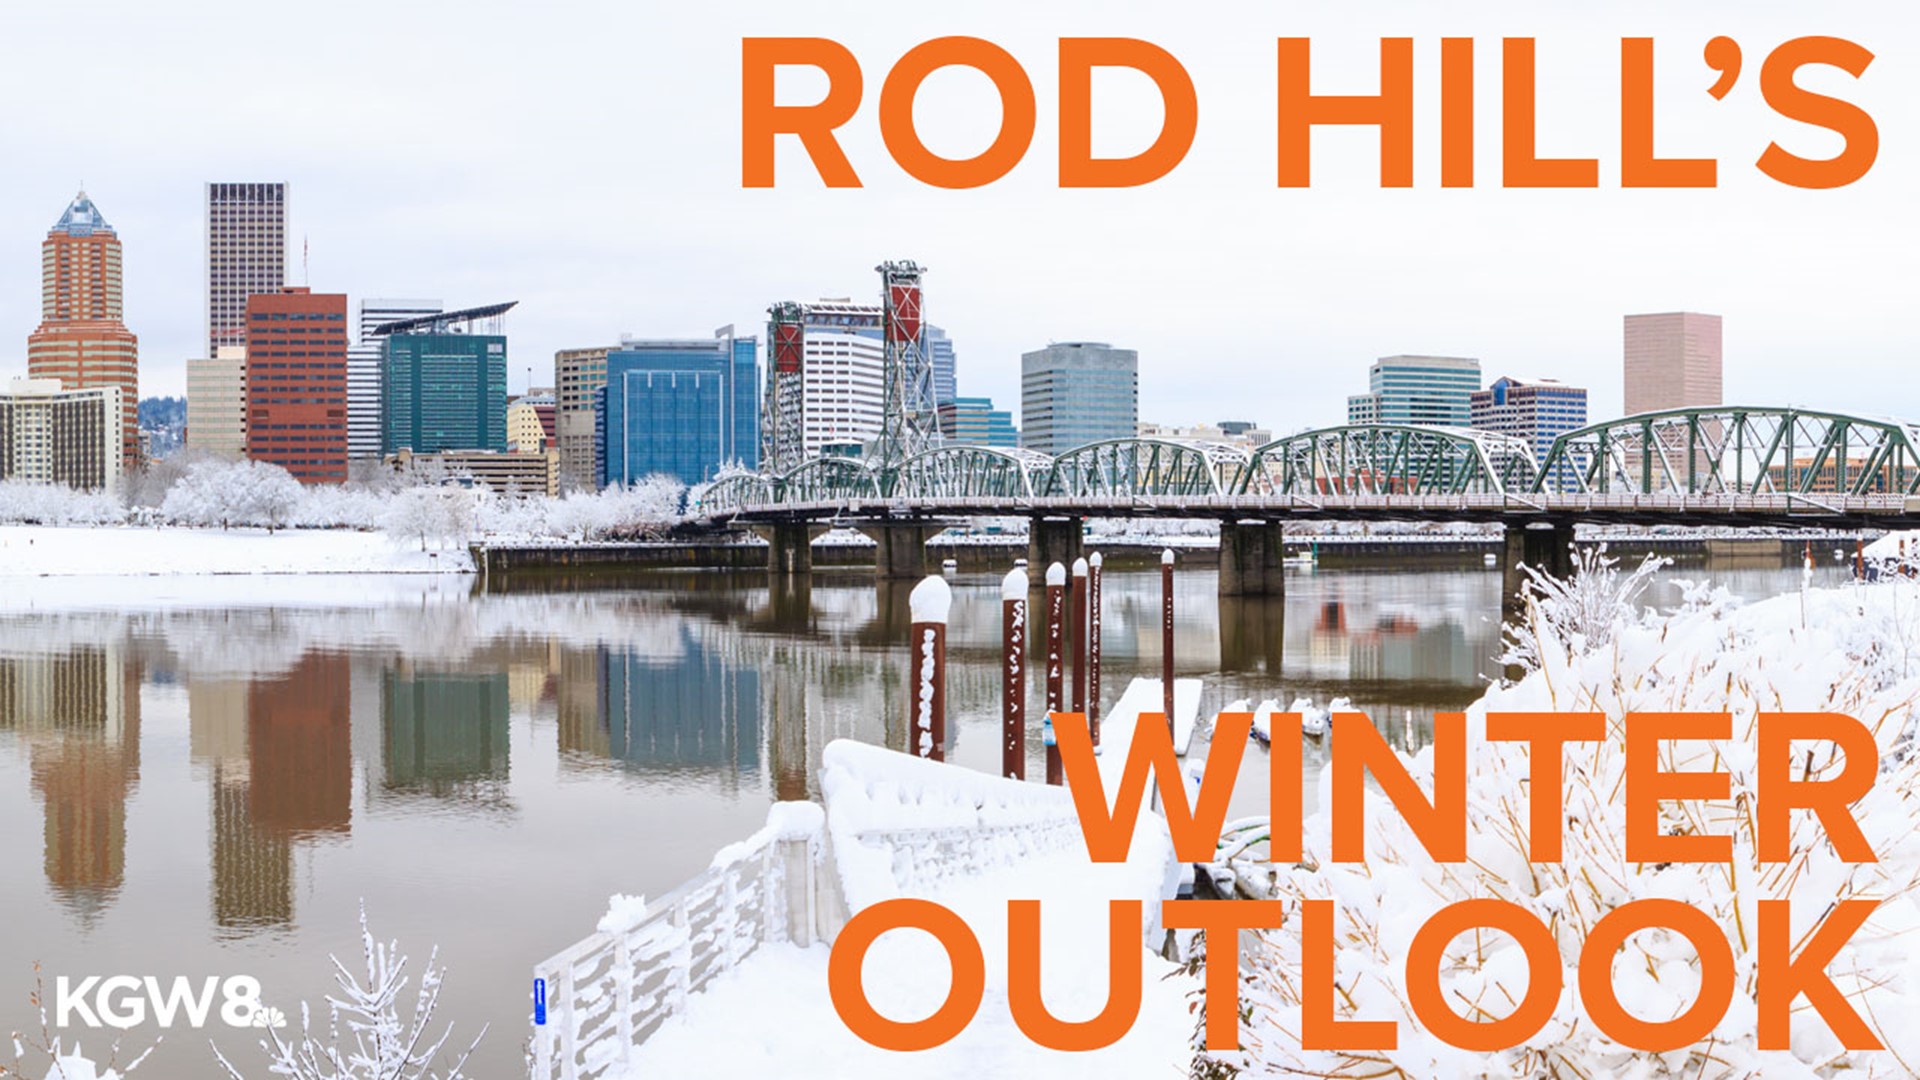 KGW meteorologist Rod Hill's 2019 Winter Outlook calls for one big snowstorm in Portland, dumping up to 8 inches. And he says the ski season looks GREAT on Mt. Hood!